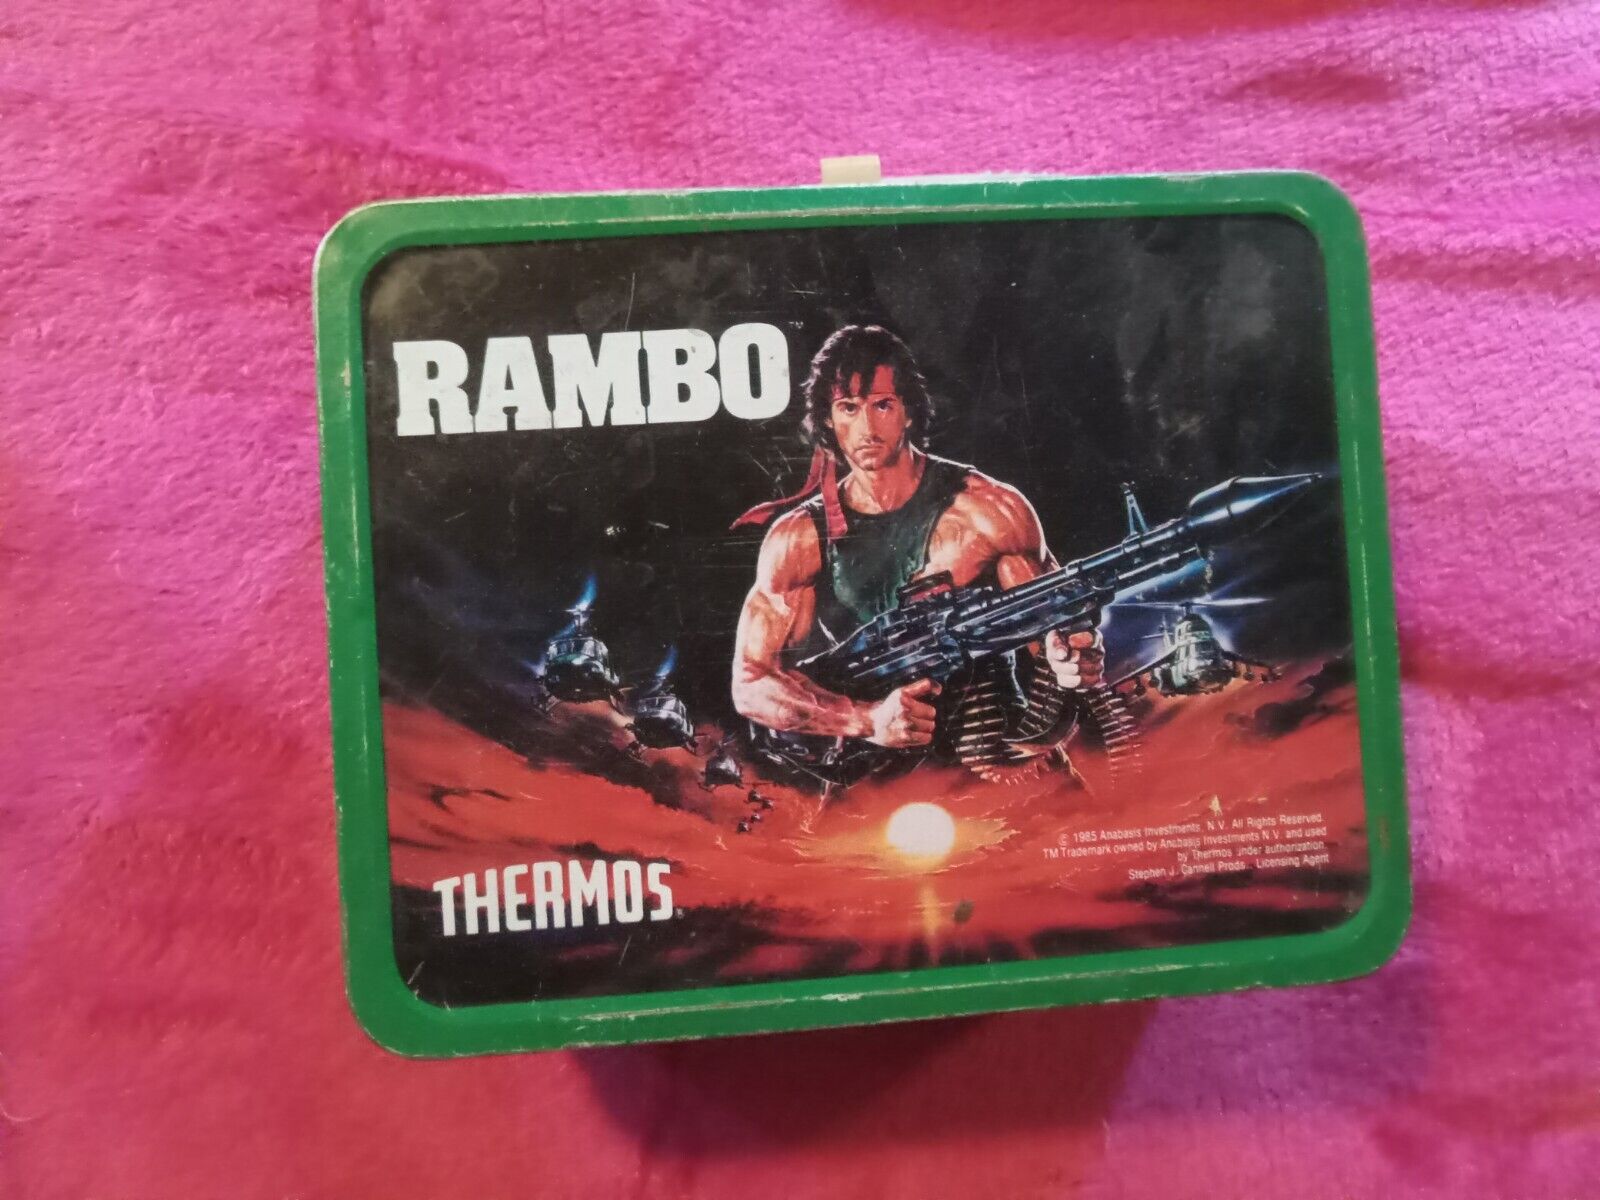 RAMBO 1985 VINTAGE METAL LUNCH BOX AND THERMOS GREEN SYLVESTER STALLONE 